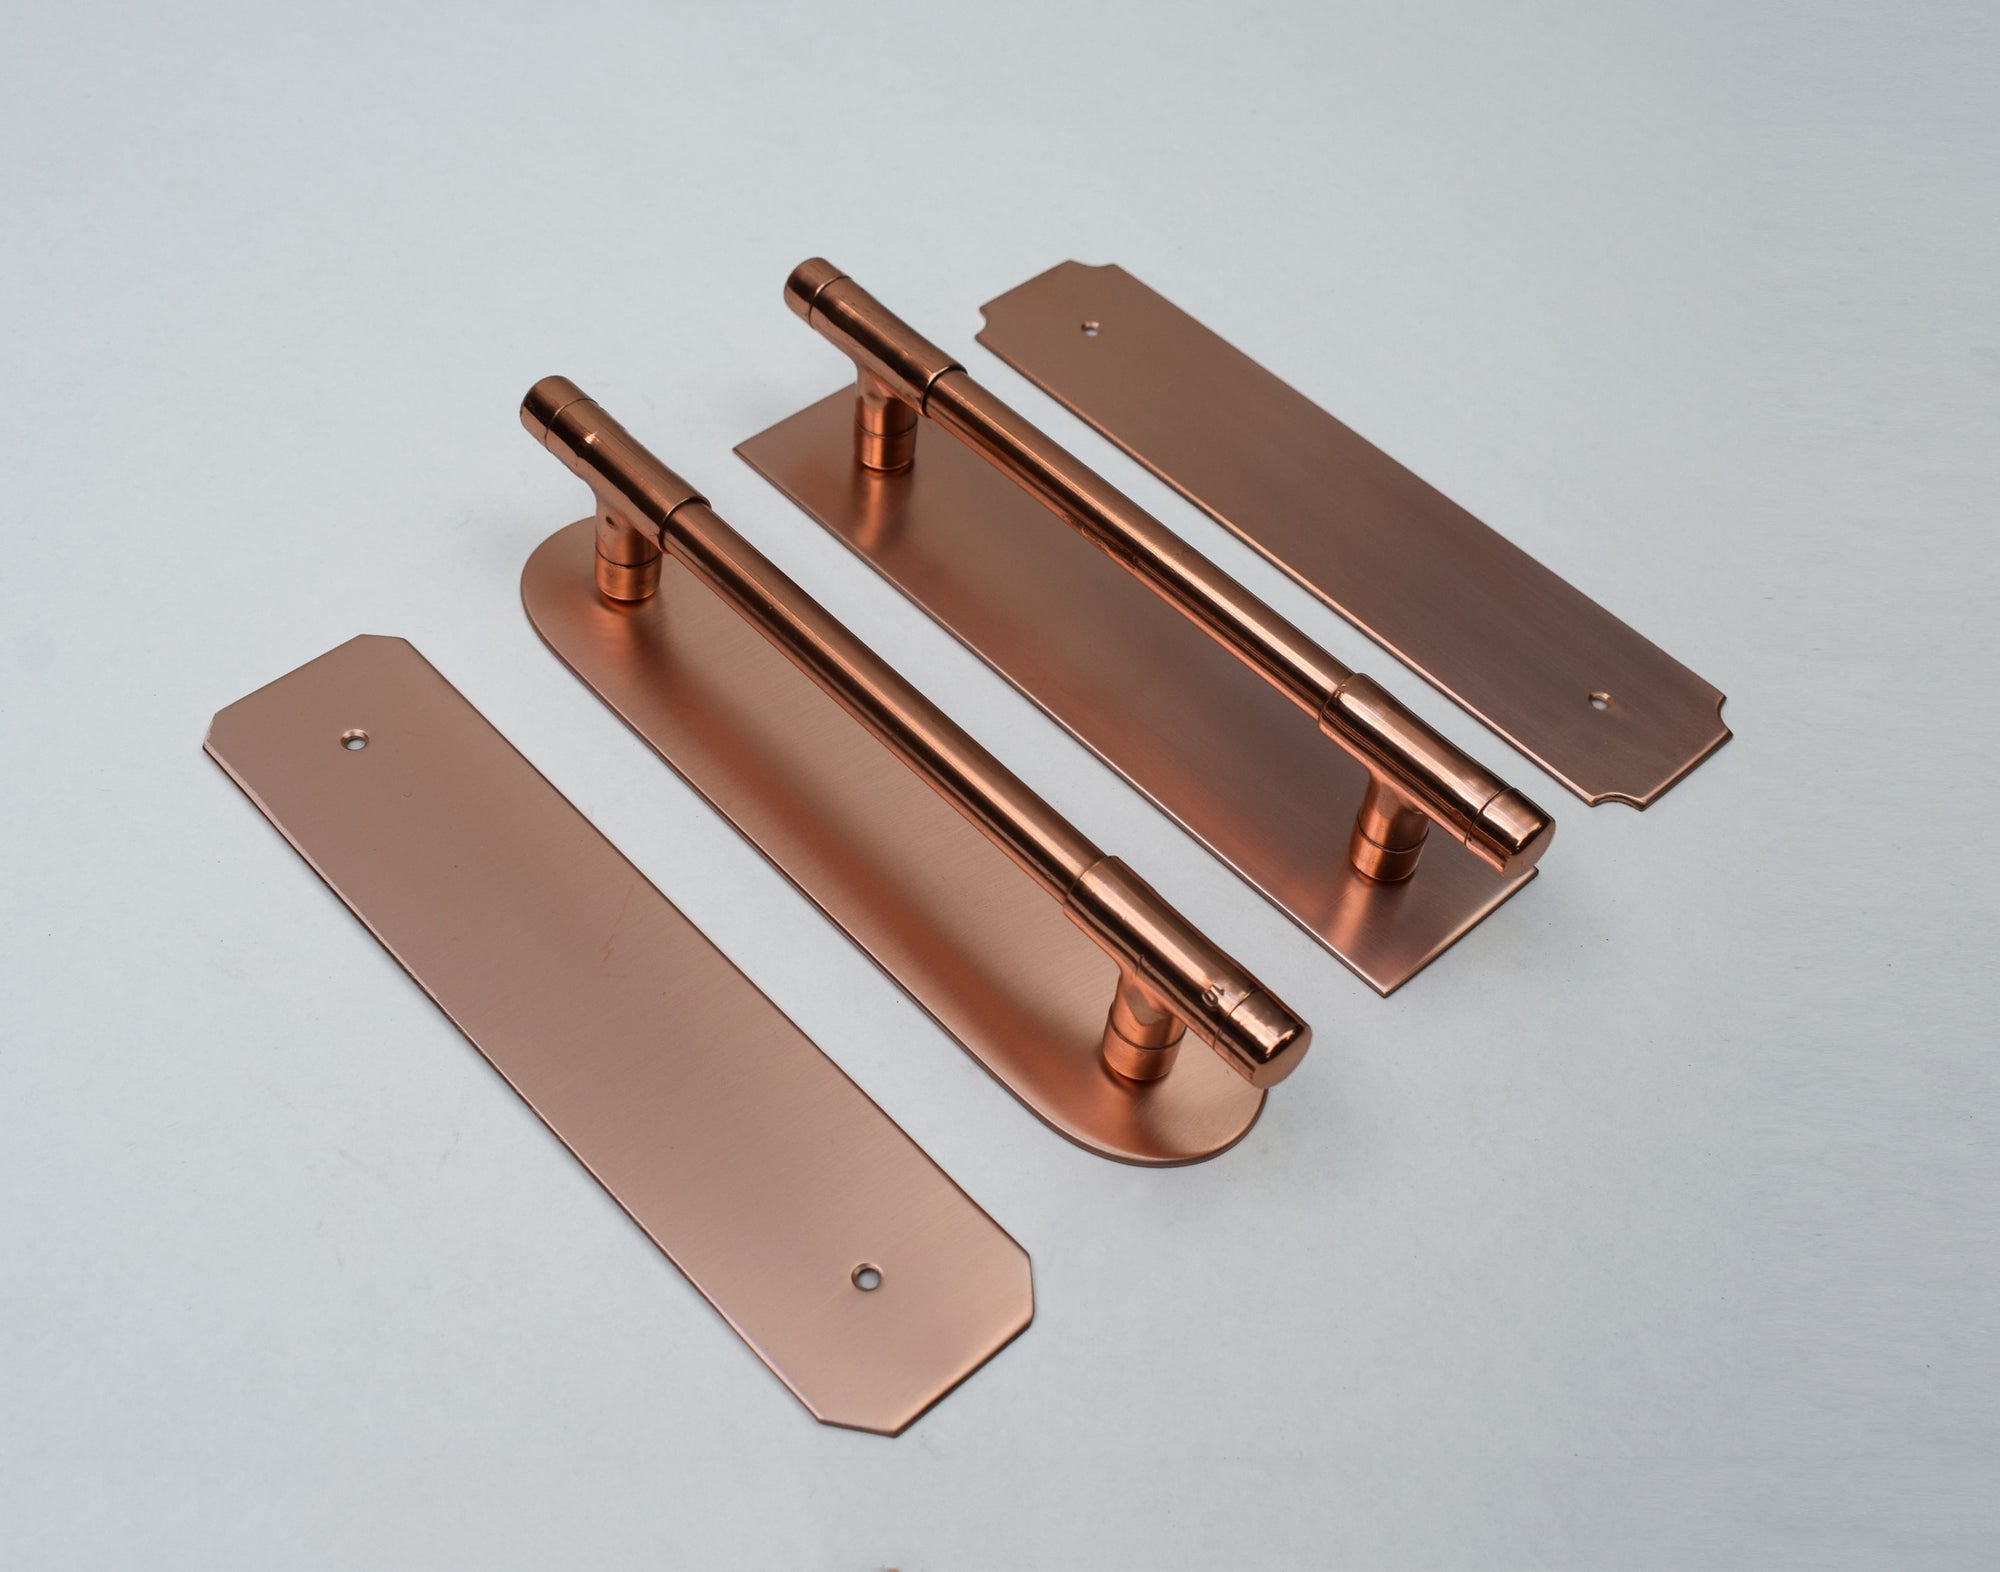 Angled Copper Backplate With Copper Handles